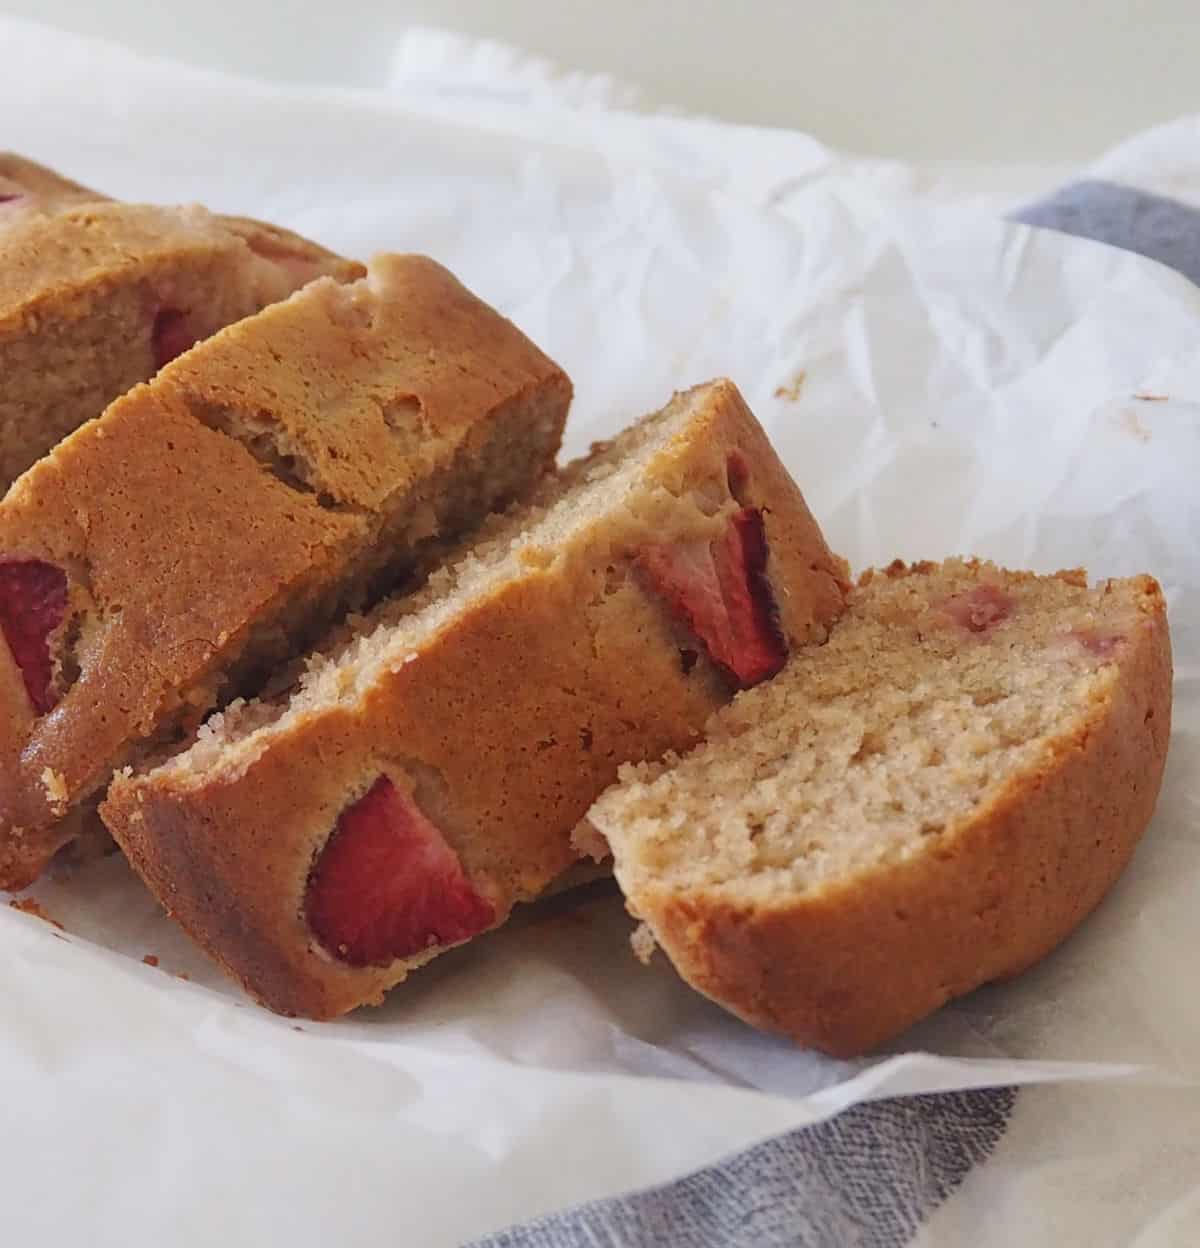 Slices of Banana and Strawberry Loaf sitting on a sheet of baking paper which is on top of a blue check tea towel.